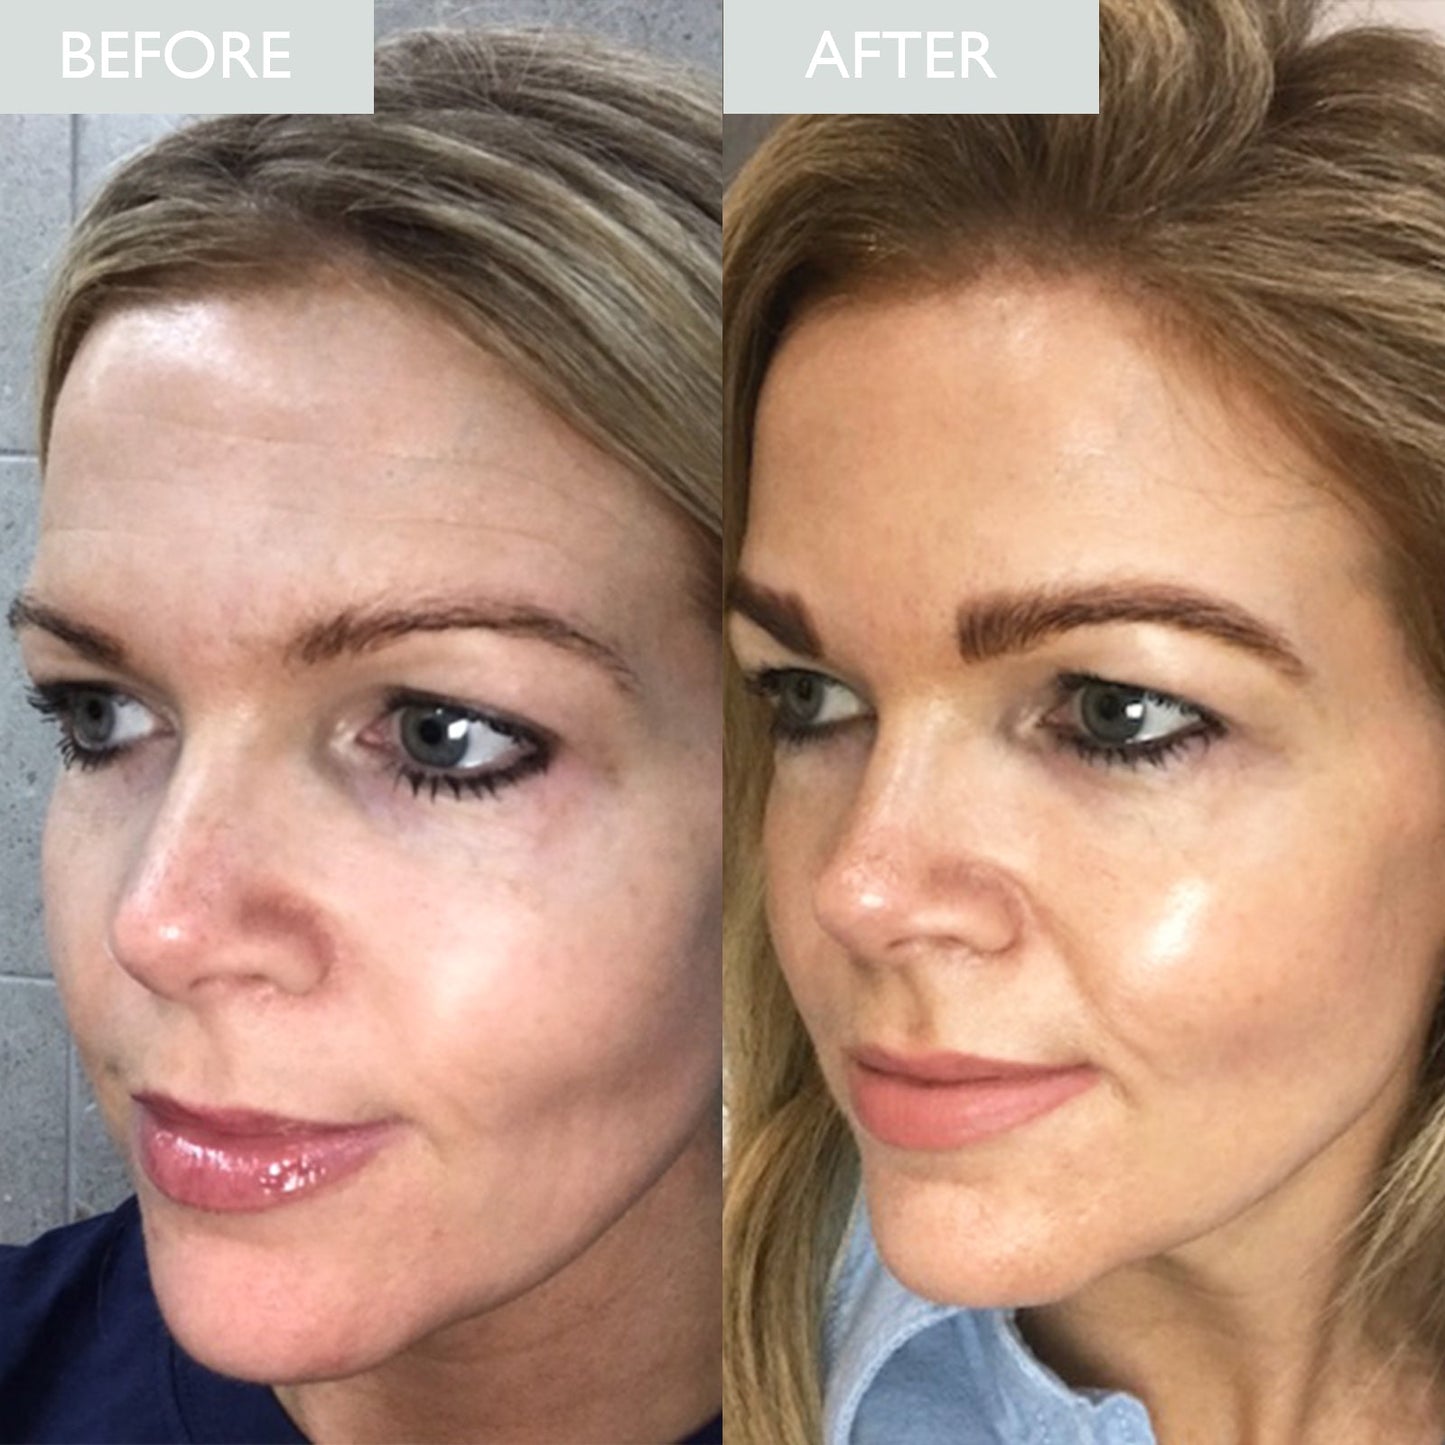 Before and after photo of a lady having dry skin, after using Skinician restoring night cream.